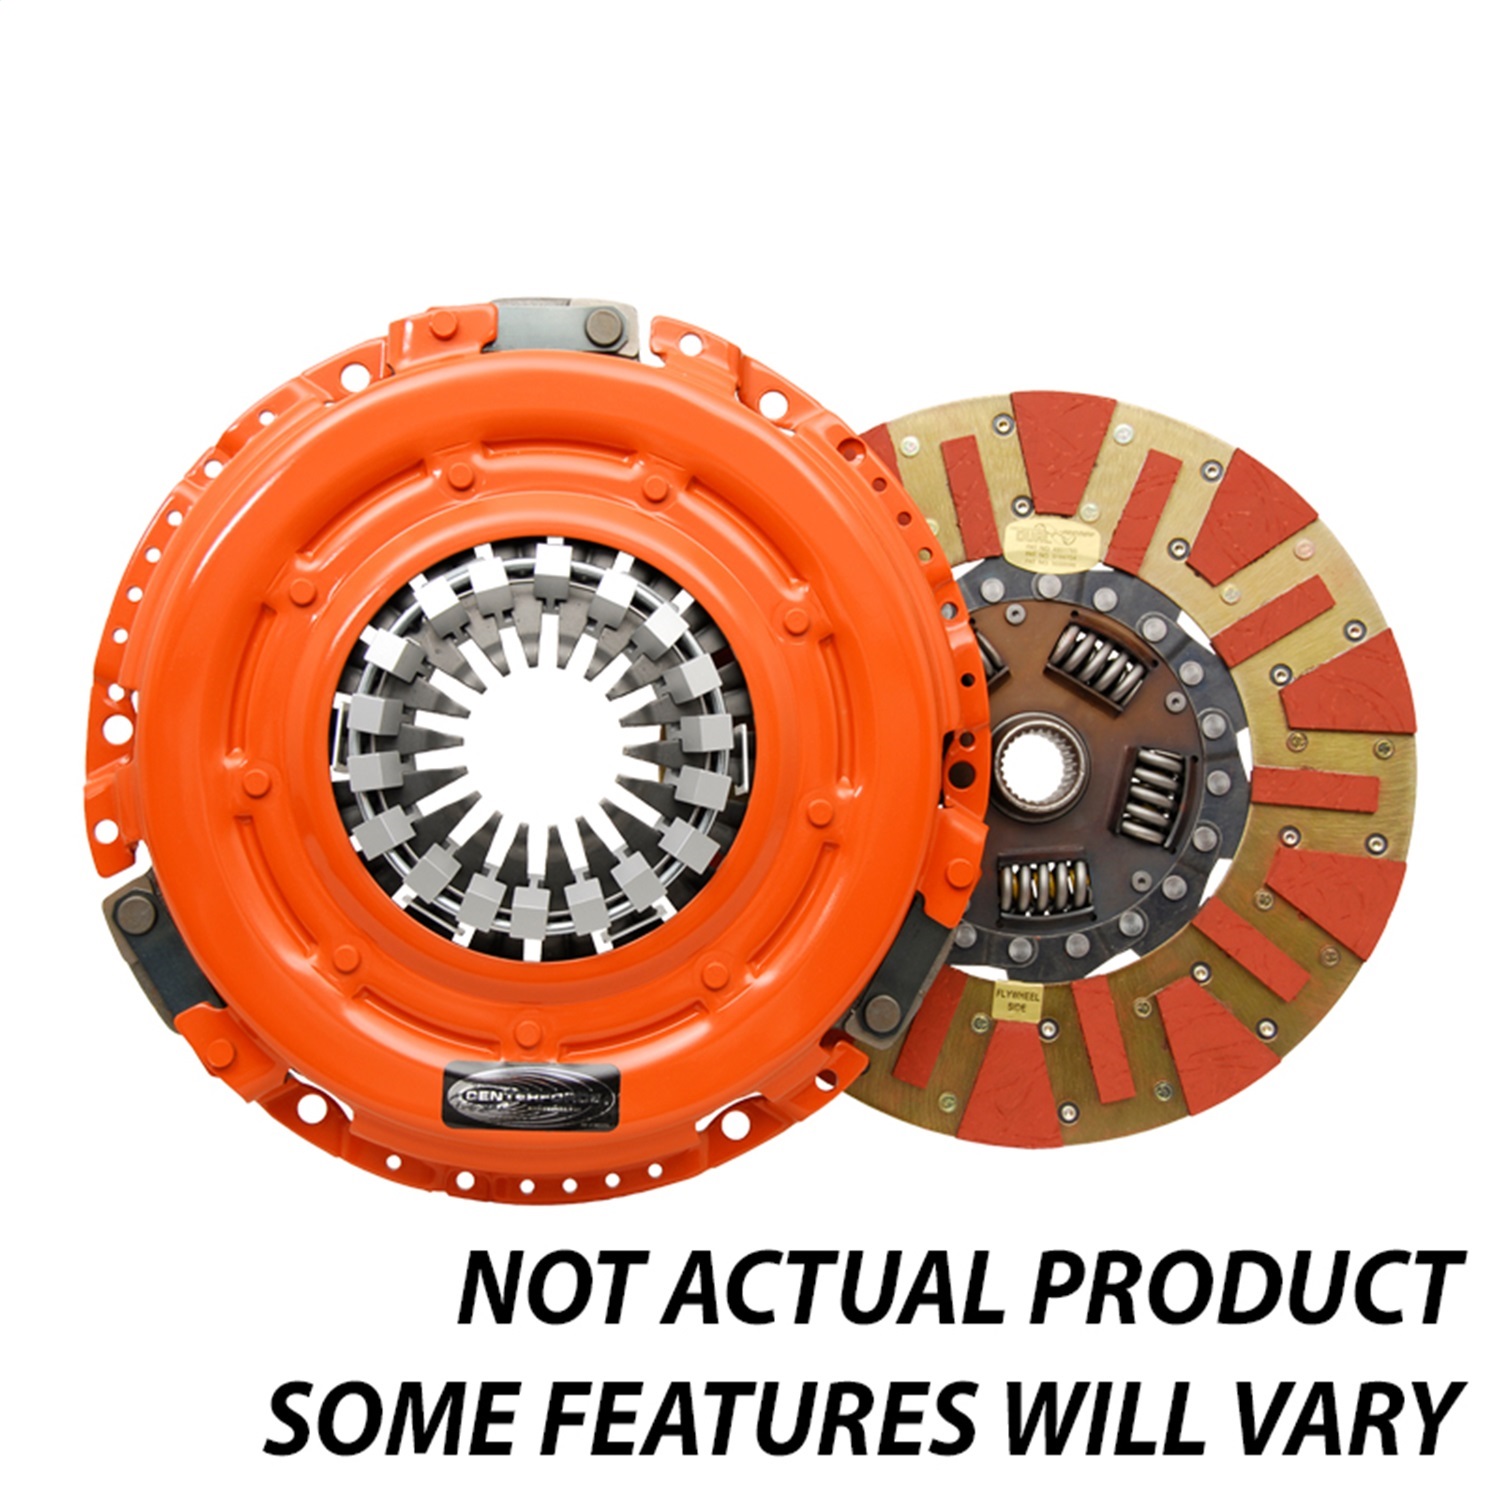 Centerforce Centerforce DF915015 Dual Friction Clutch Pressure Plate And Disc Set